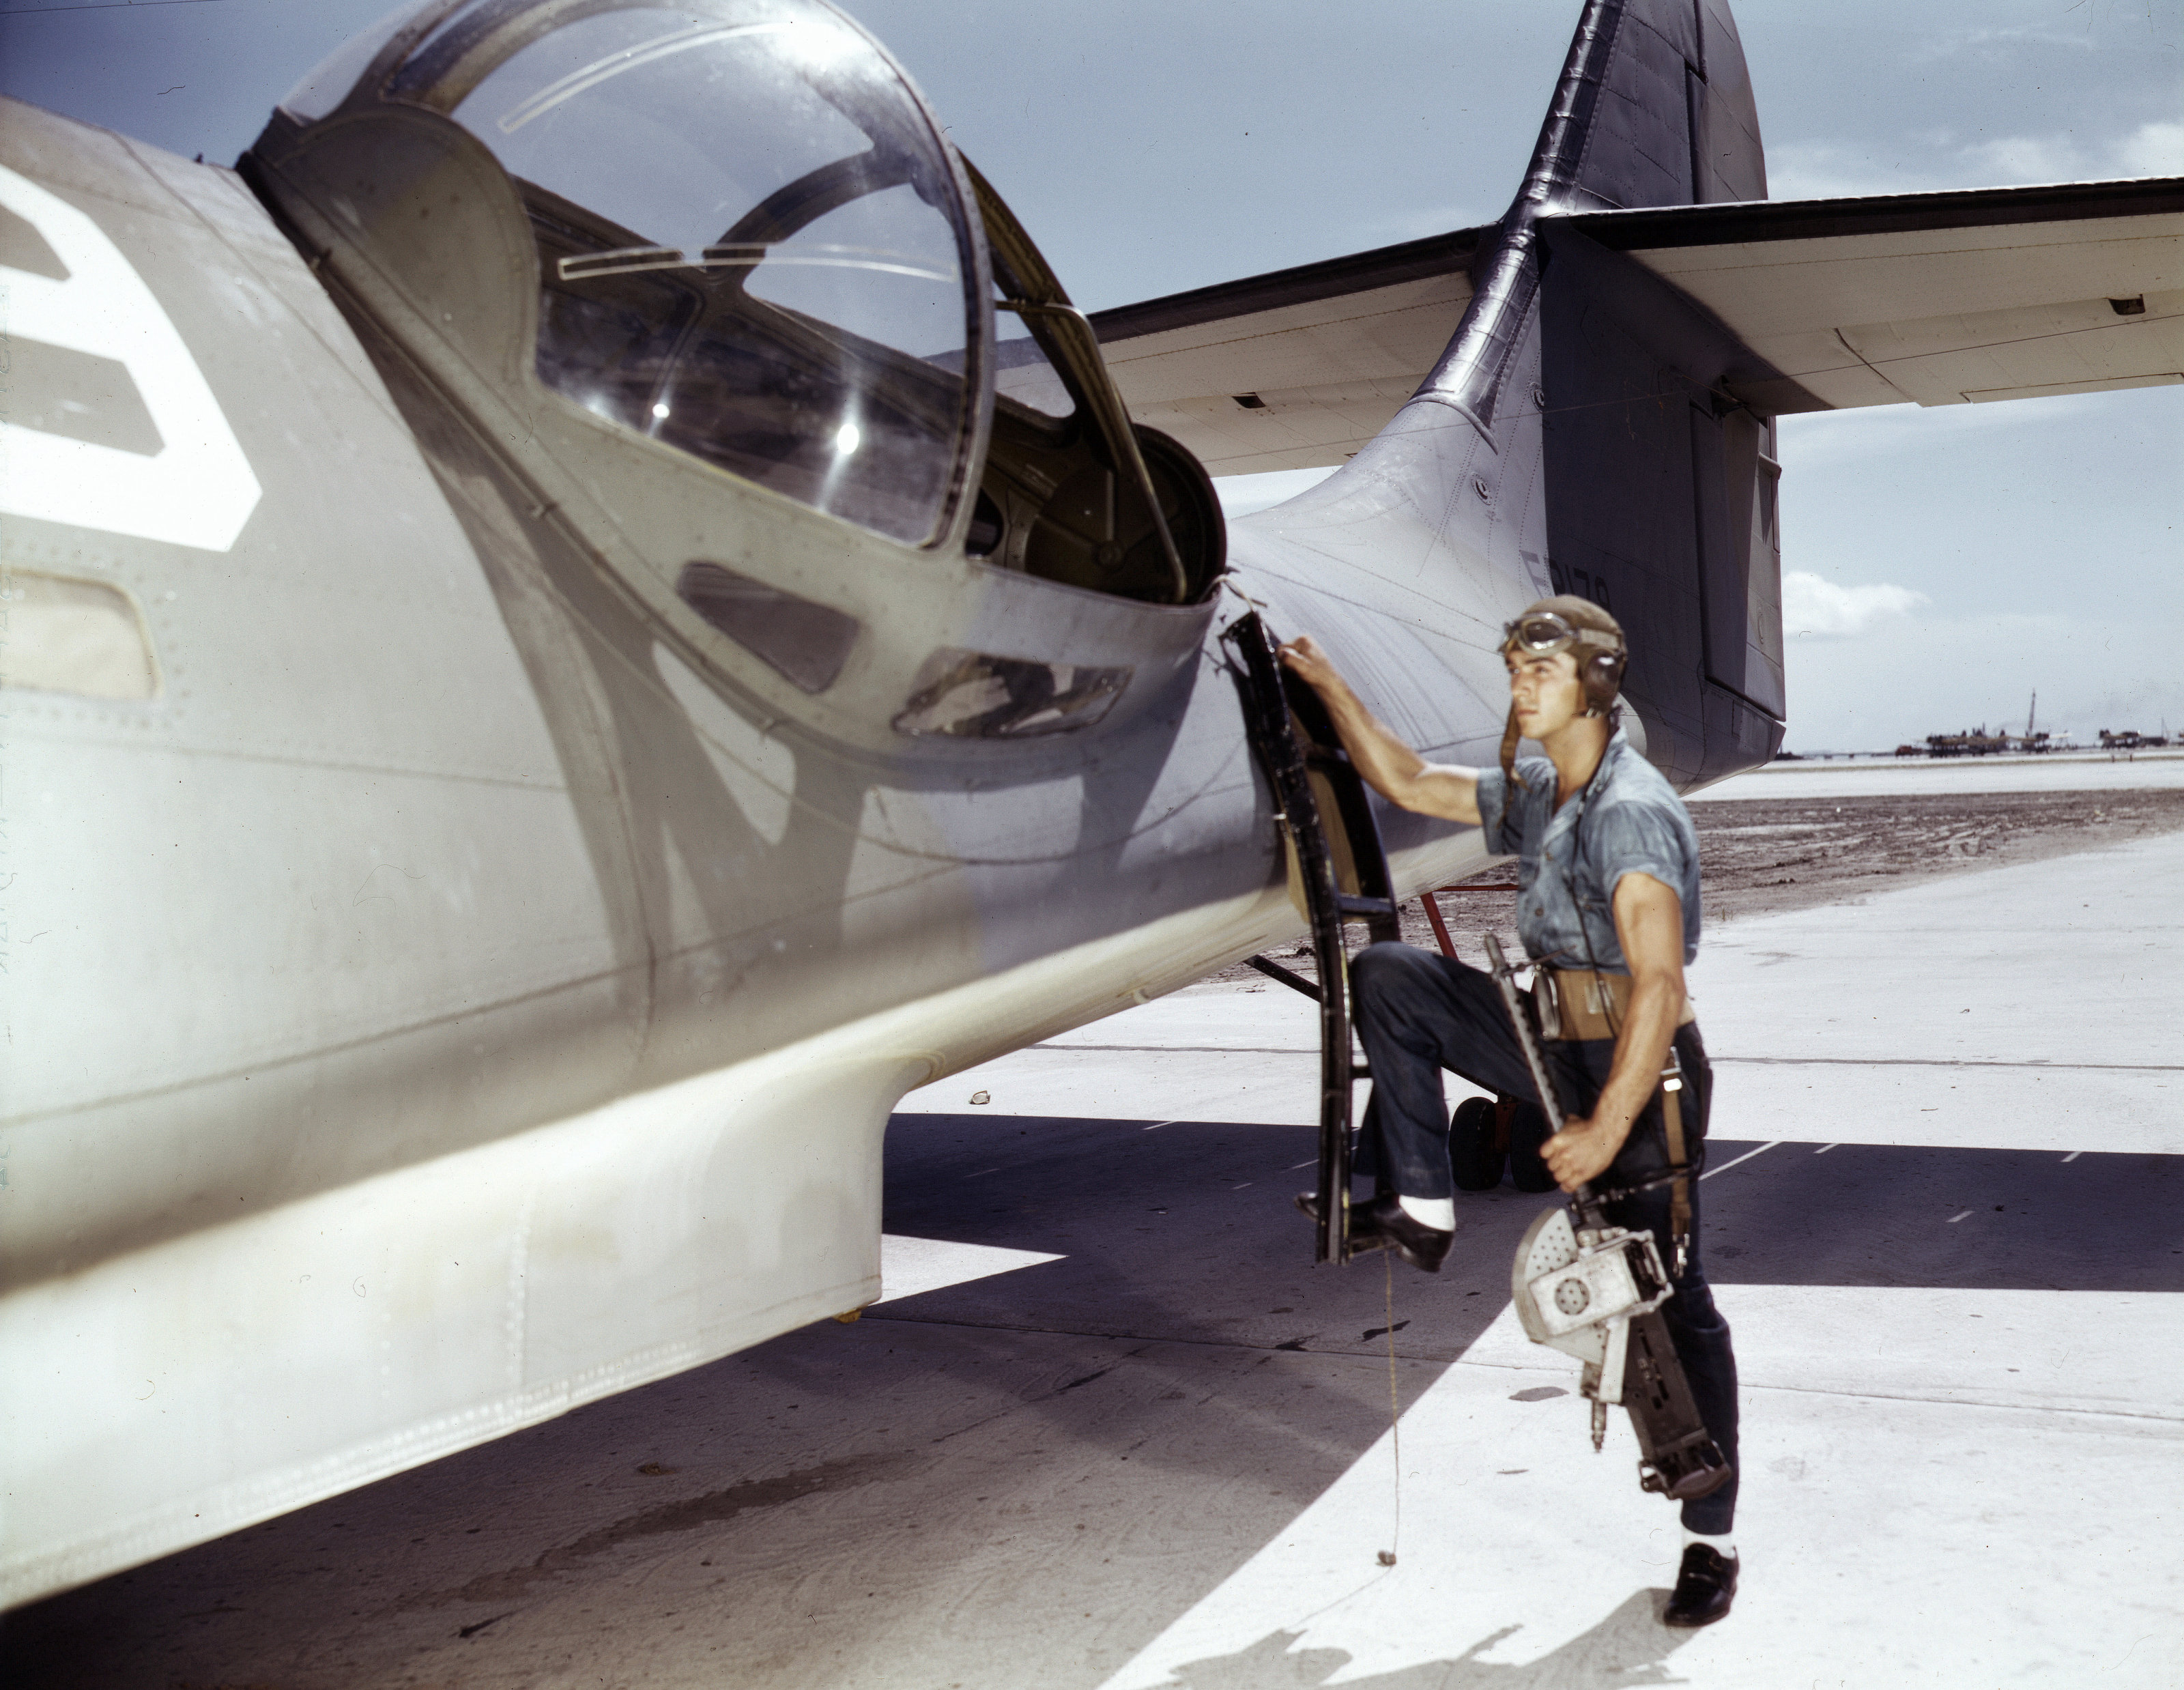 US Navy ordnanceman Jesse Rhodes Waller posing with a M1919 Browning machine gun next to a PBY Catalina aircraft, Naval Air Station, Corpus Christi, Texas, United States, Aug 1942, photo 1 of 3